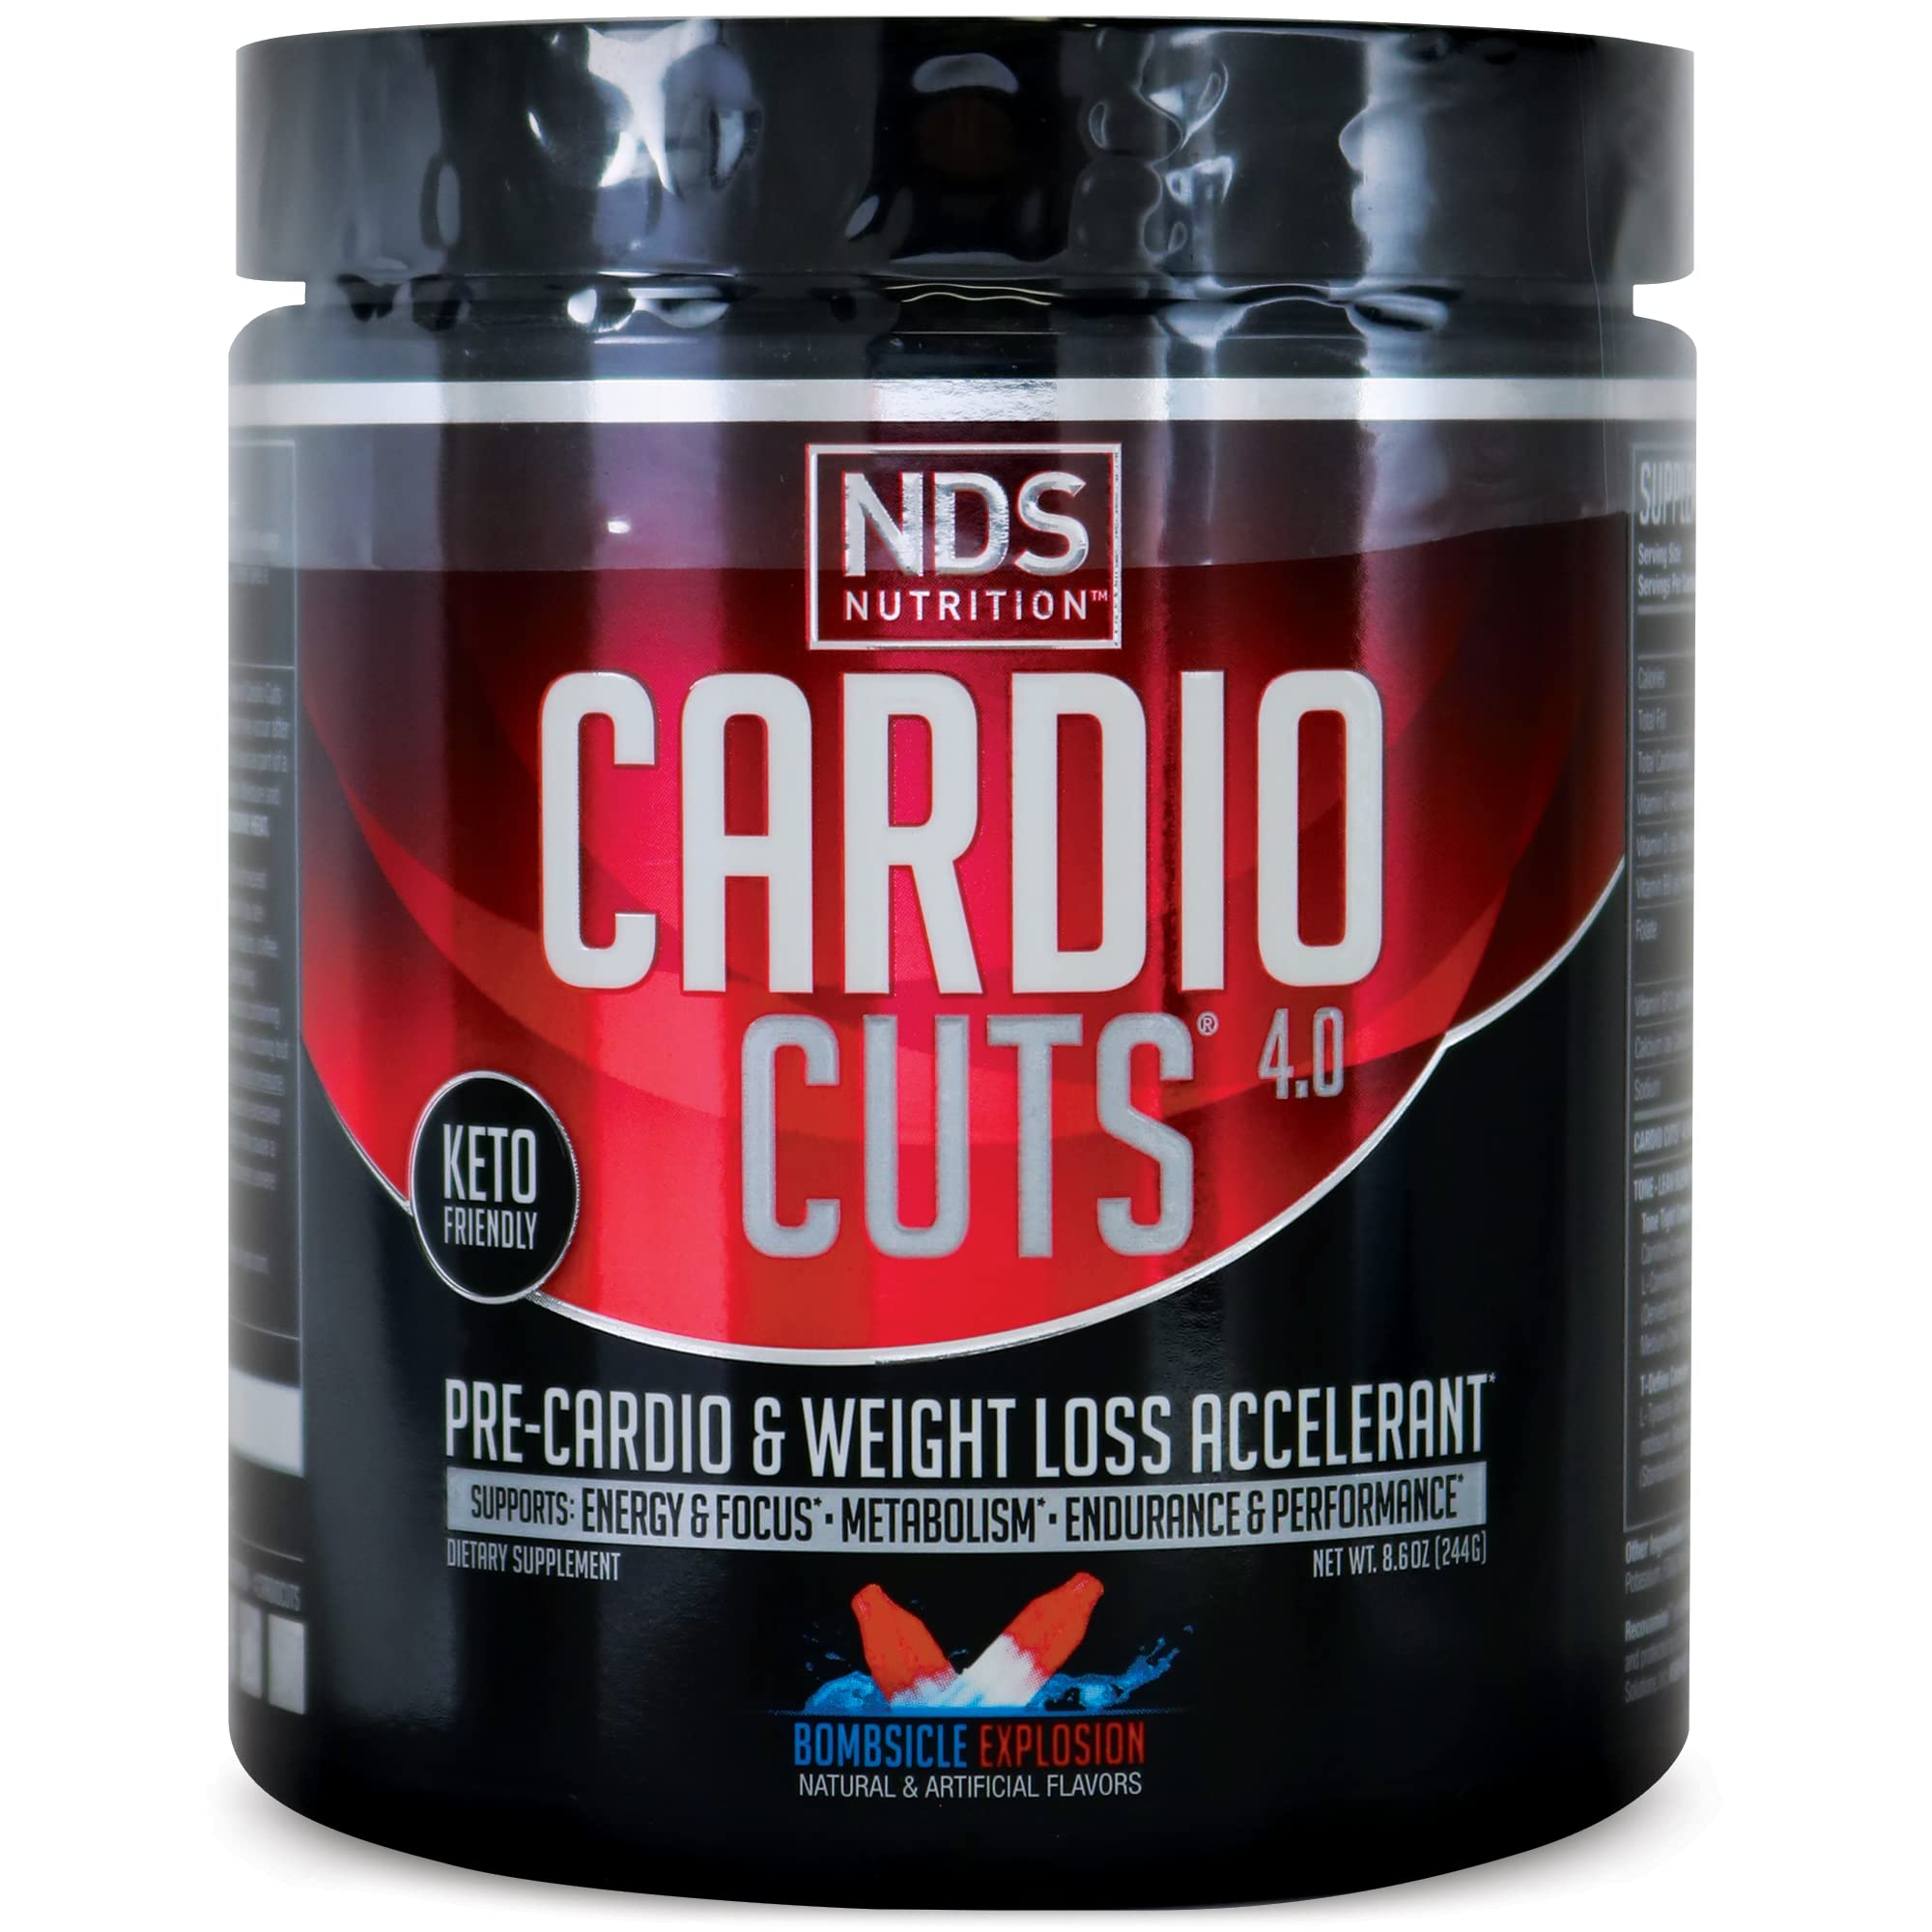 NDS Nutrition Cardio Cuts 4.0 Pre Workout Supplement - Advanced Weight Loss and Pre Cardio Formula with L-Carnitine, CLA, MCTs, L-Glutamine, and Sa...